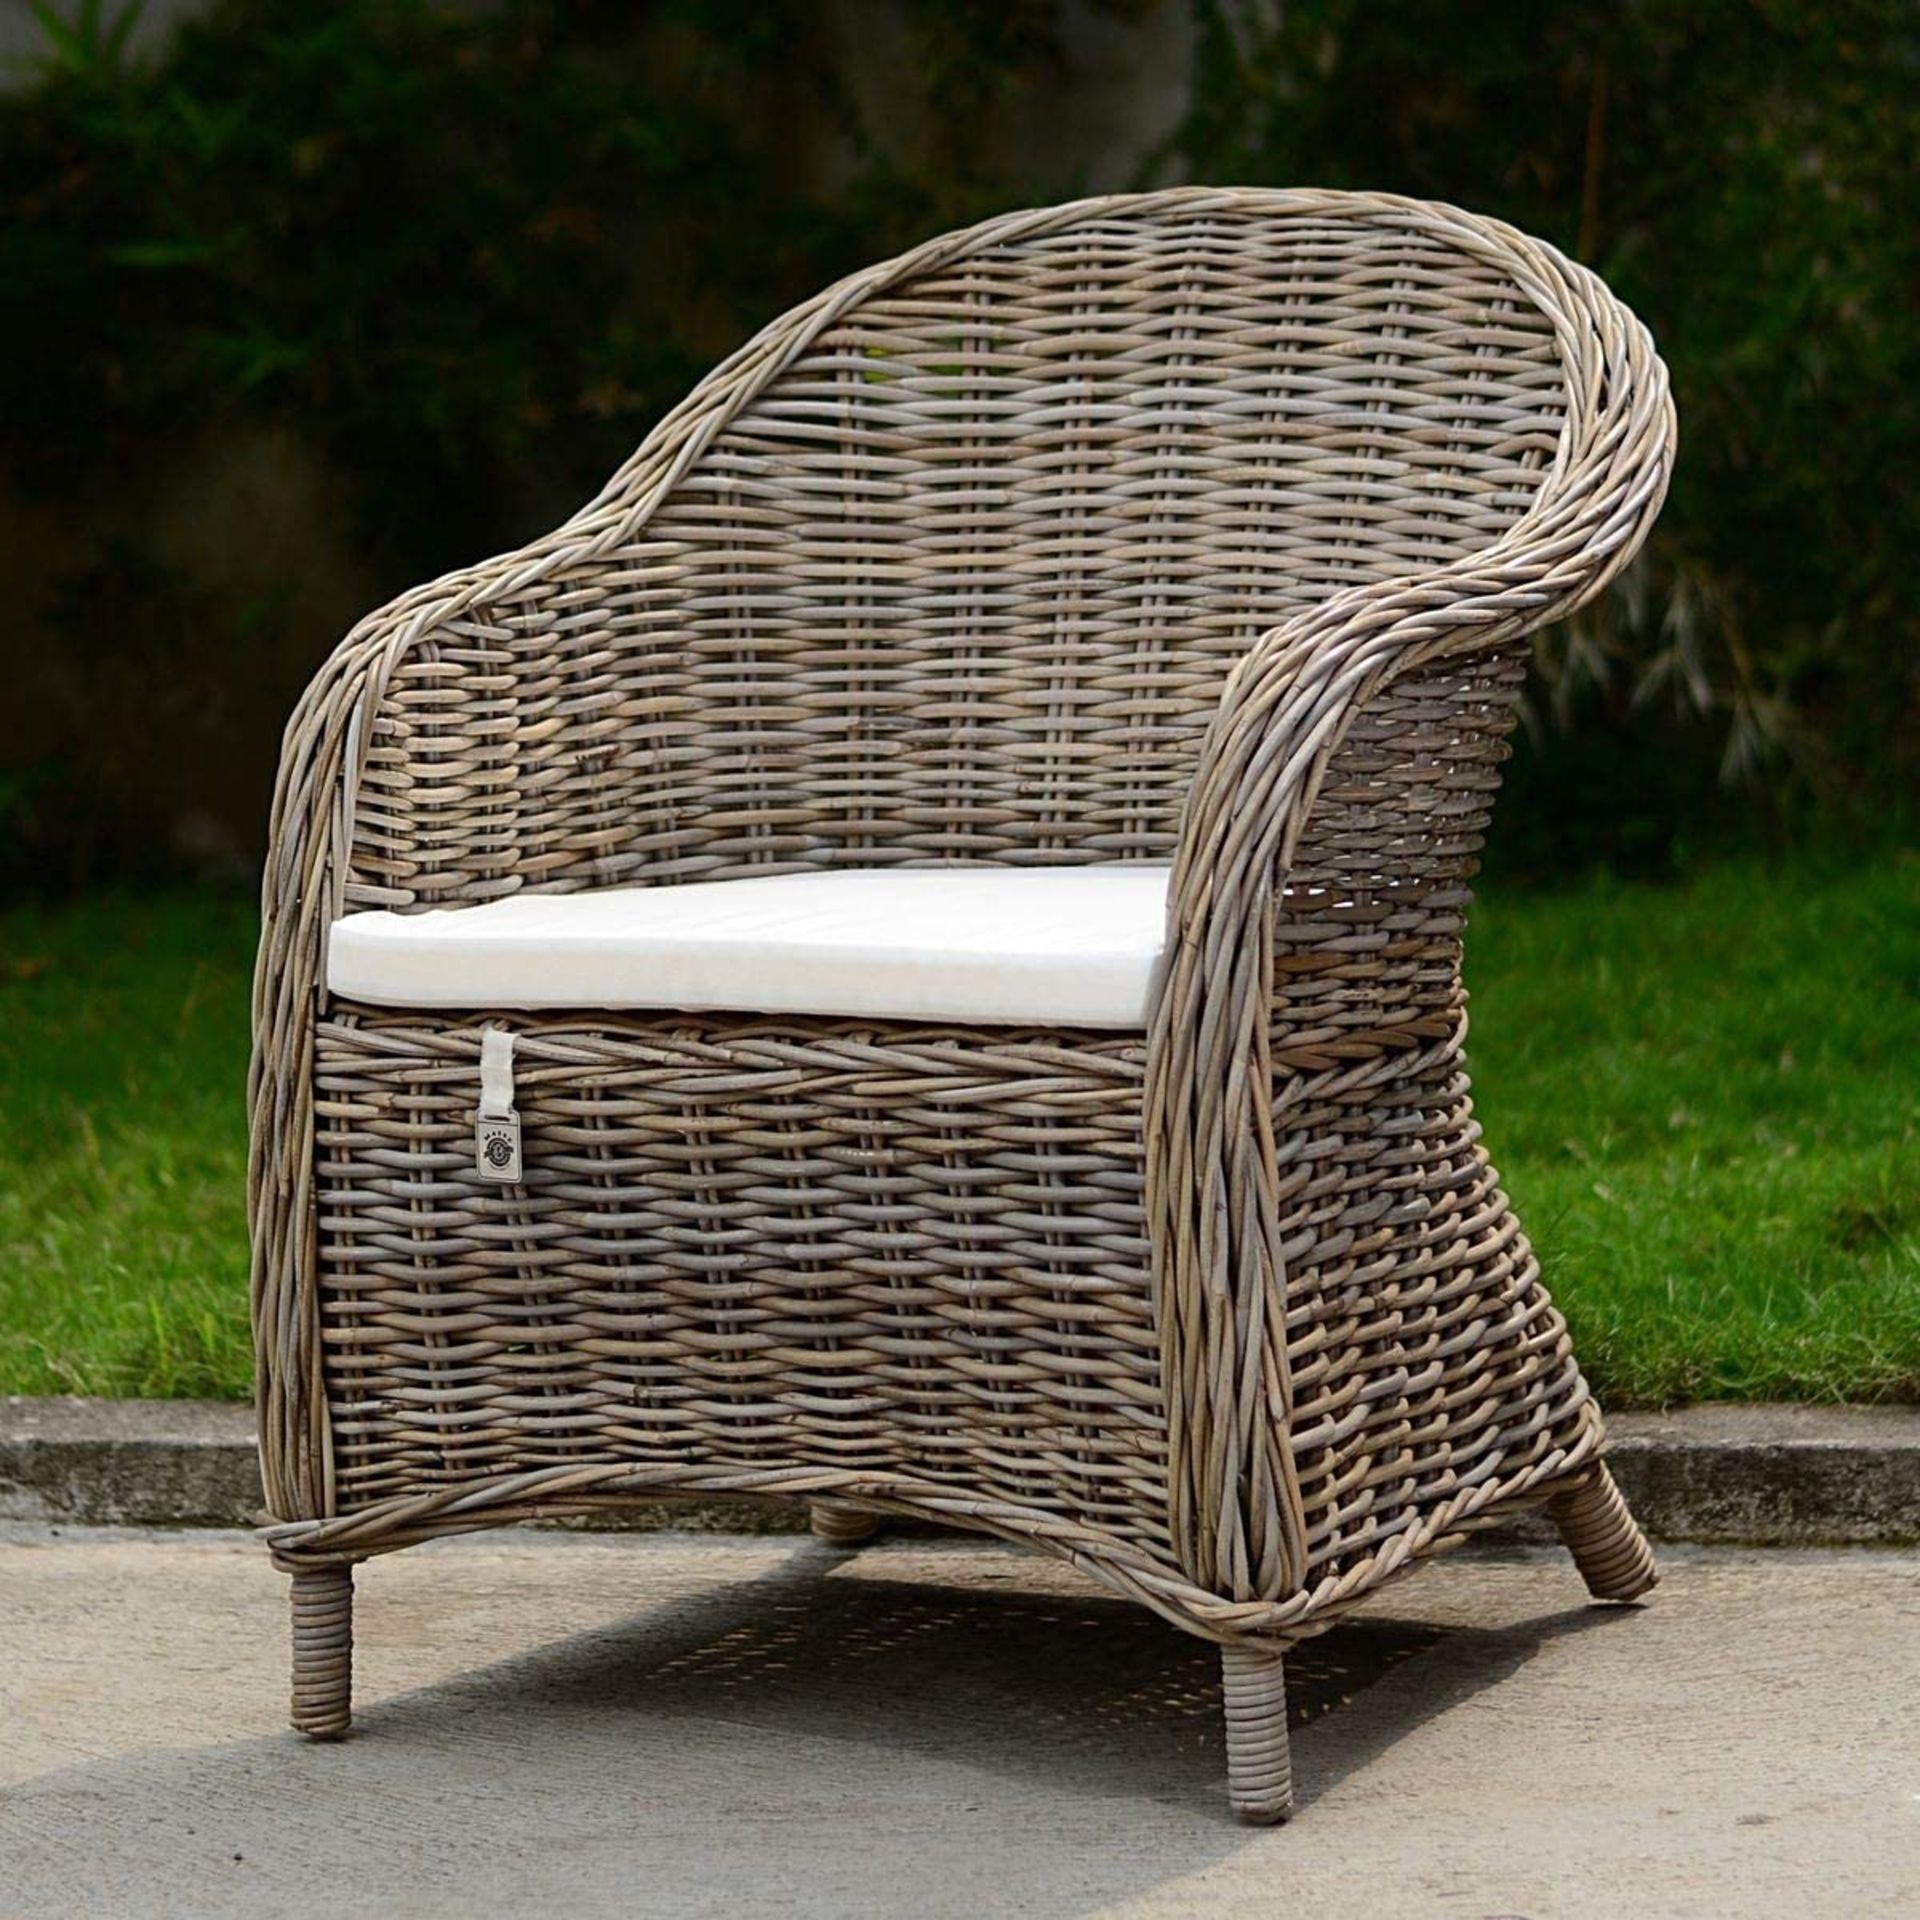 NEW & BOXED 2x Maine Furniture Co. Kubu Rattan Armchair with Cushion. (SR5). (SKU: M500156). STRONG, - Image 2 of 6